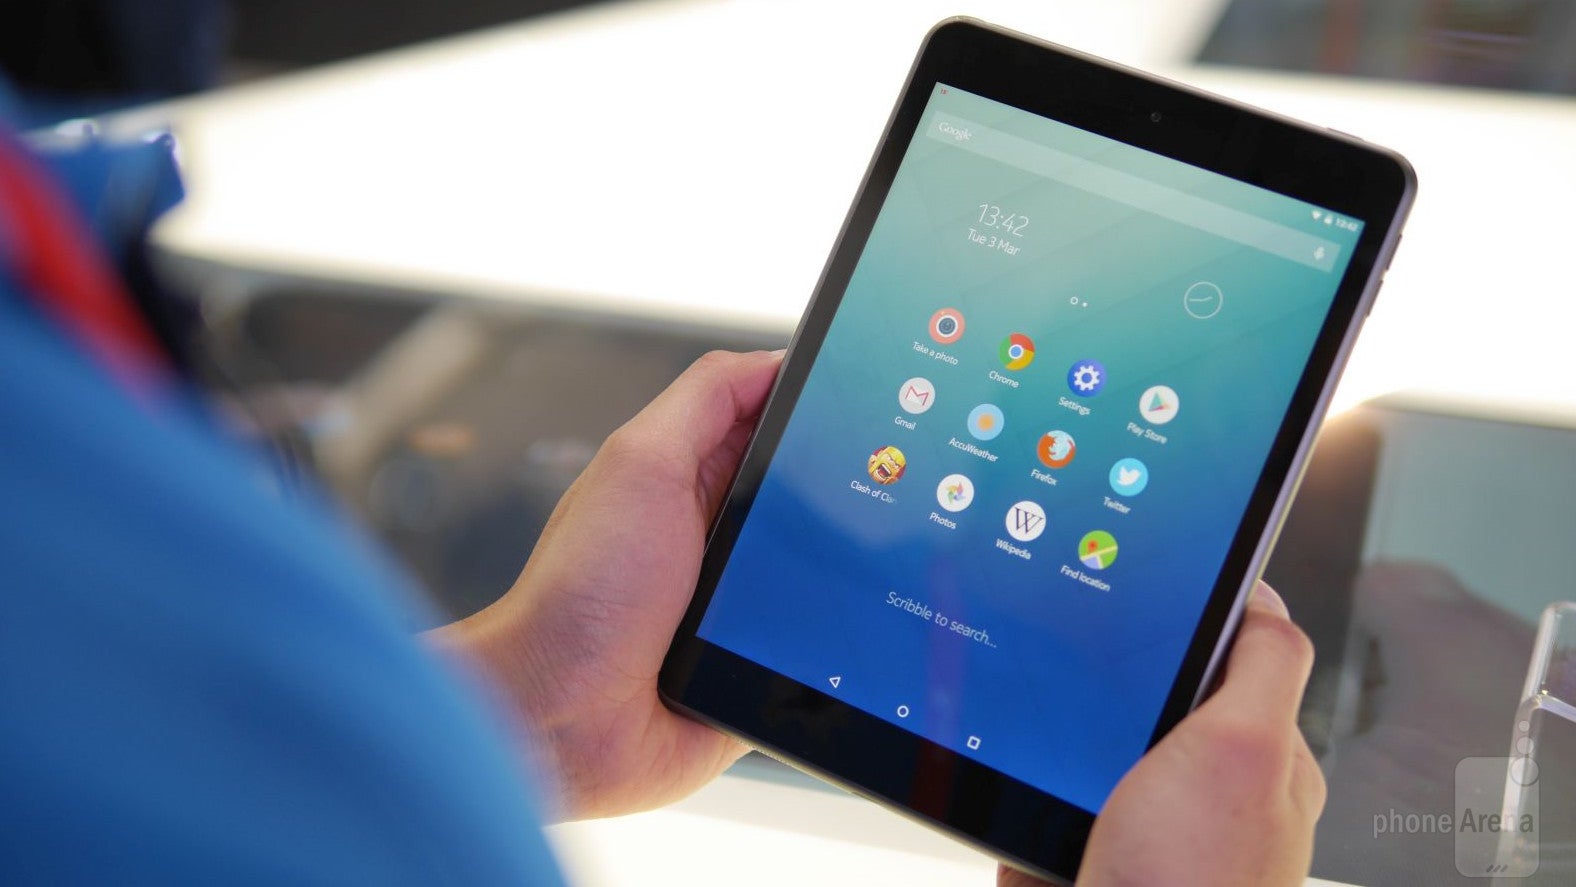 Nokia N1 hands on: the first Nokia Android tablet